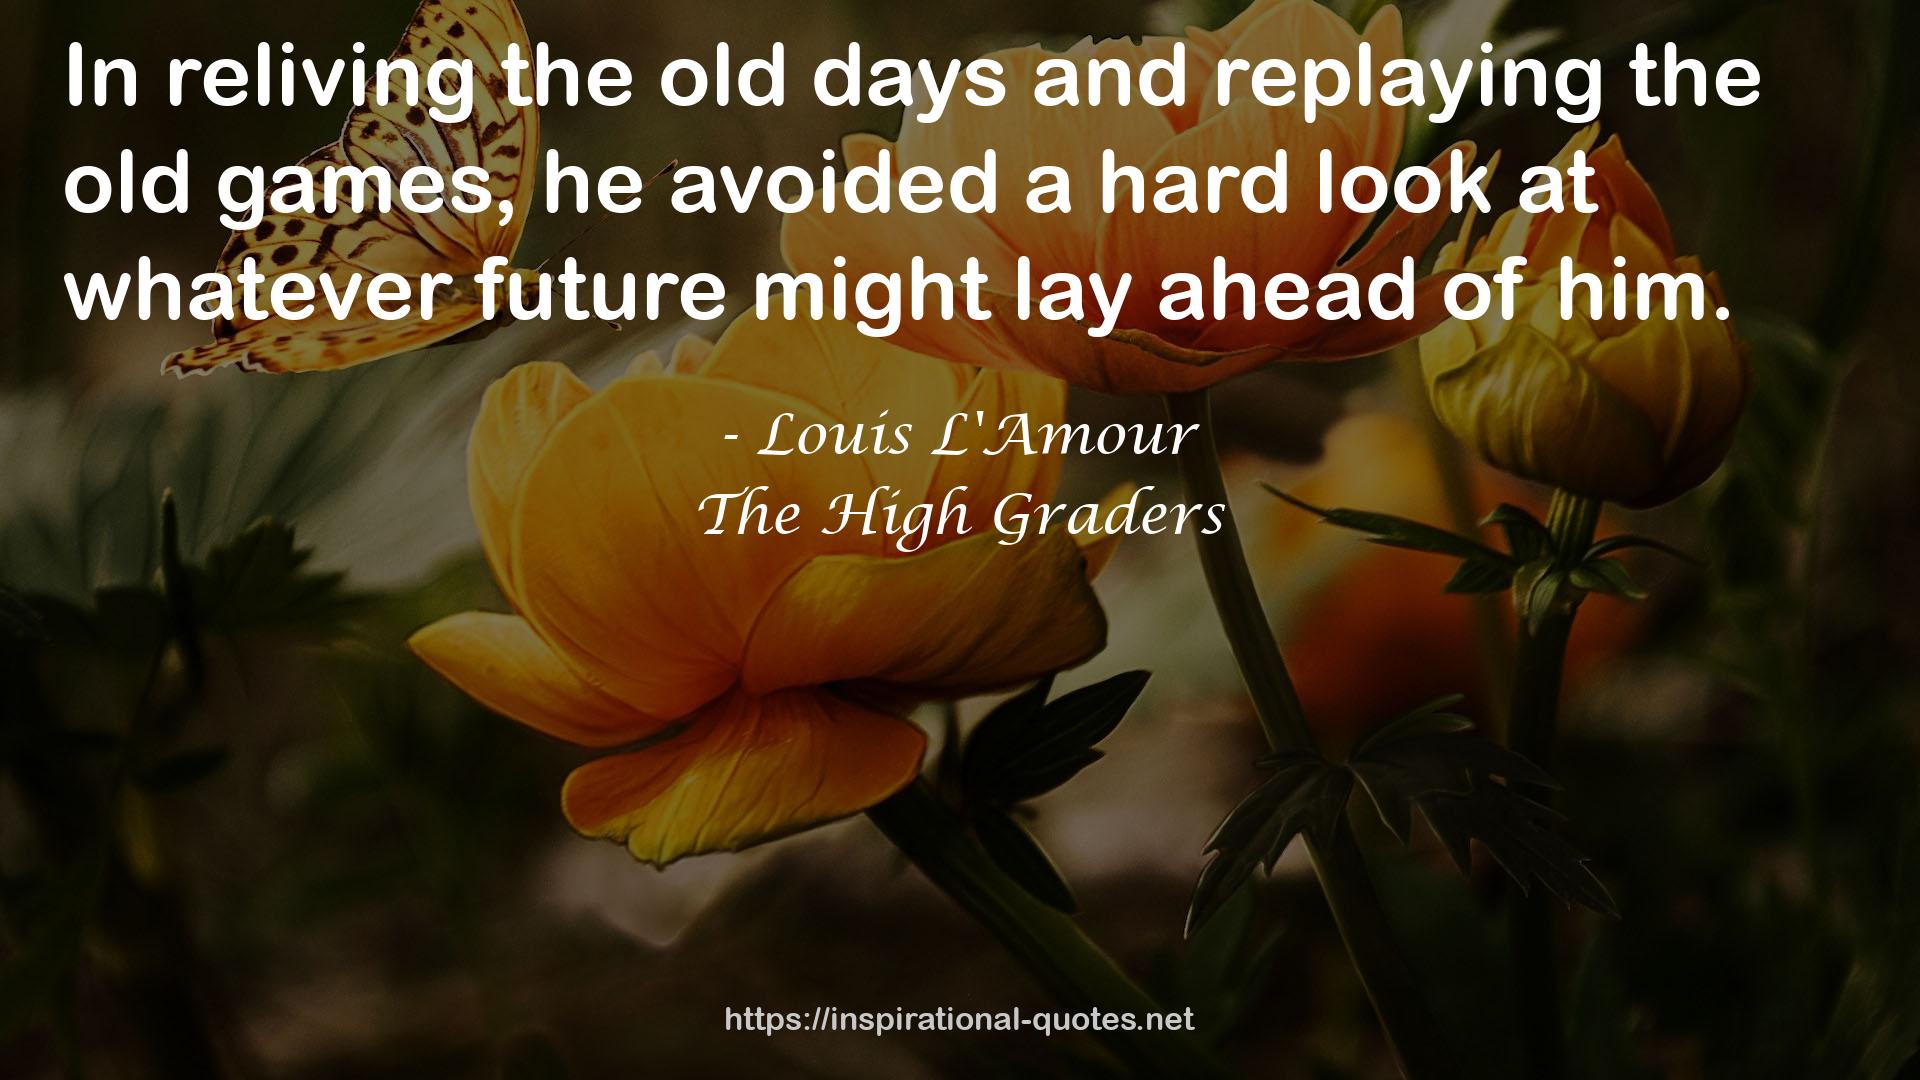 The High Graders QUOTES